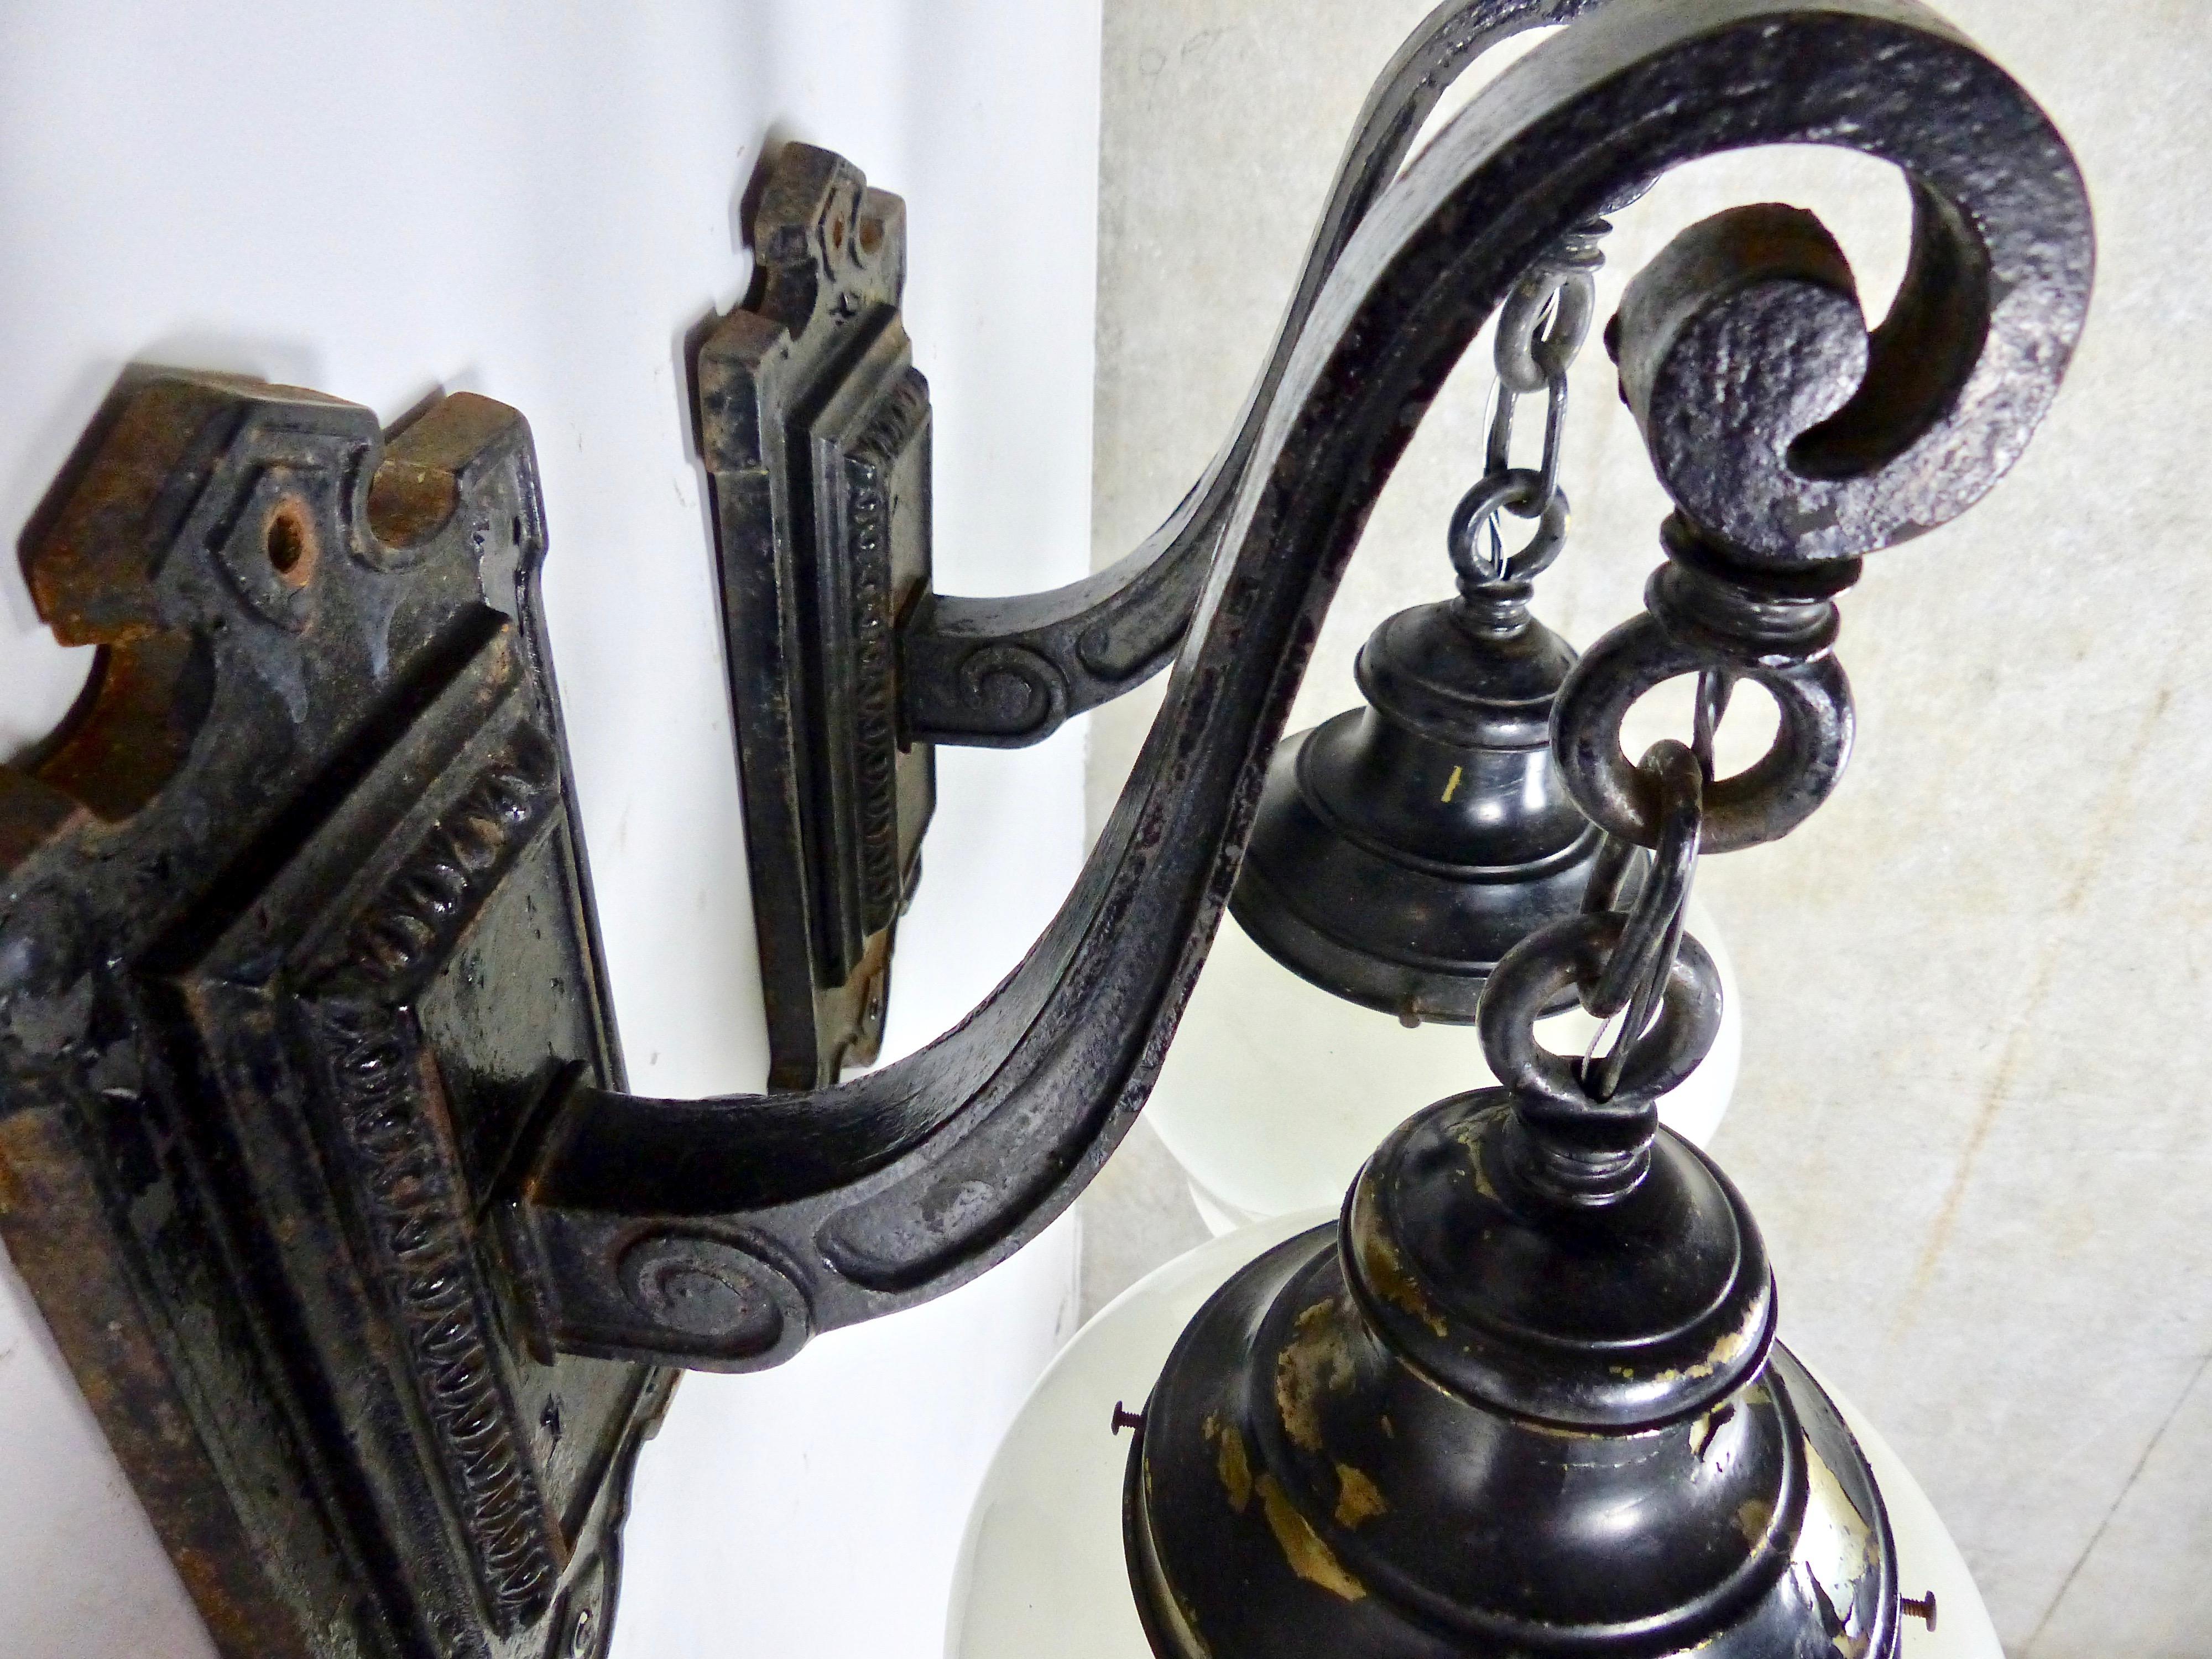 Matched pair of beautifully proportioned exterior wall sconces, circa 1900. Nice details in the decorative cast iron. Early schoolhouse-style glass globes. Shade Fitters are oxidized black paint over brass.
 Re-wired and CSA approved. Dimensions 21